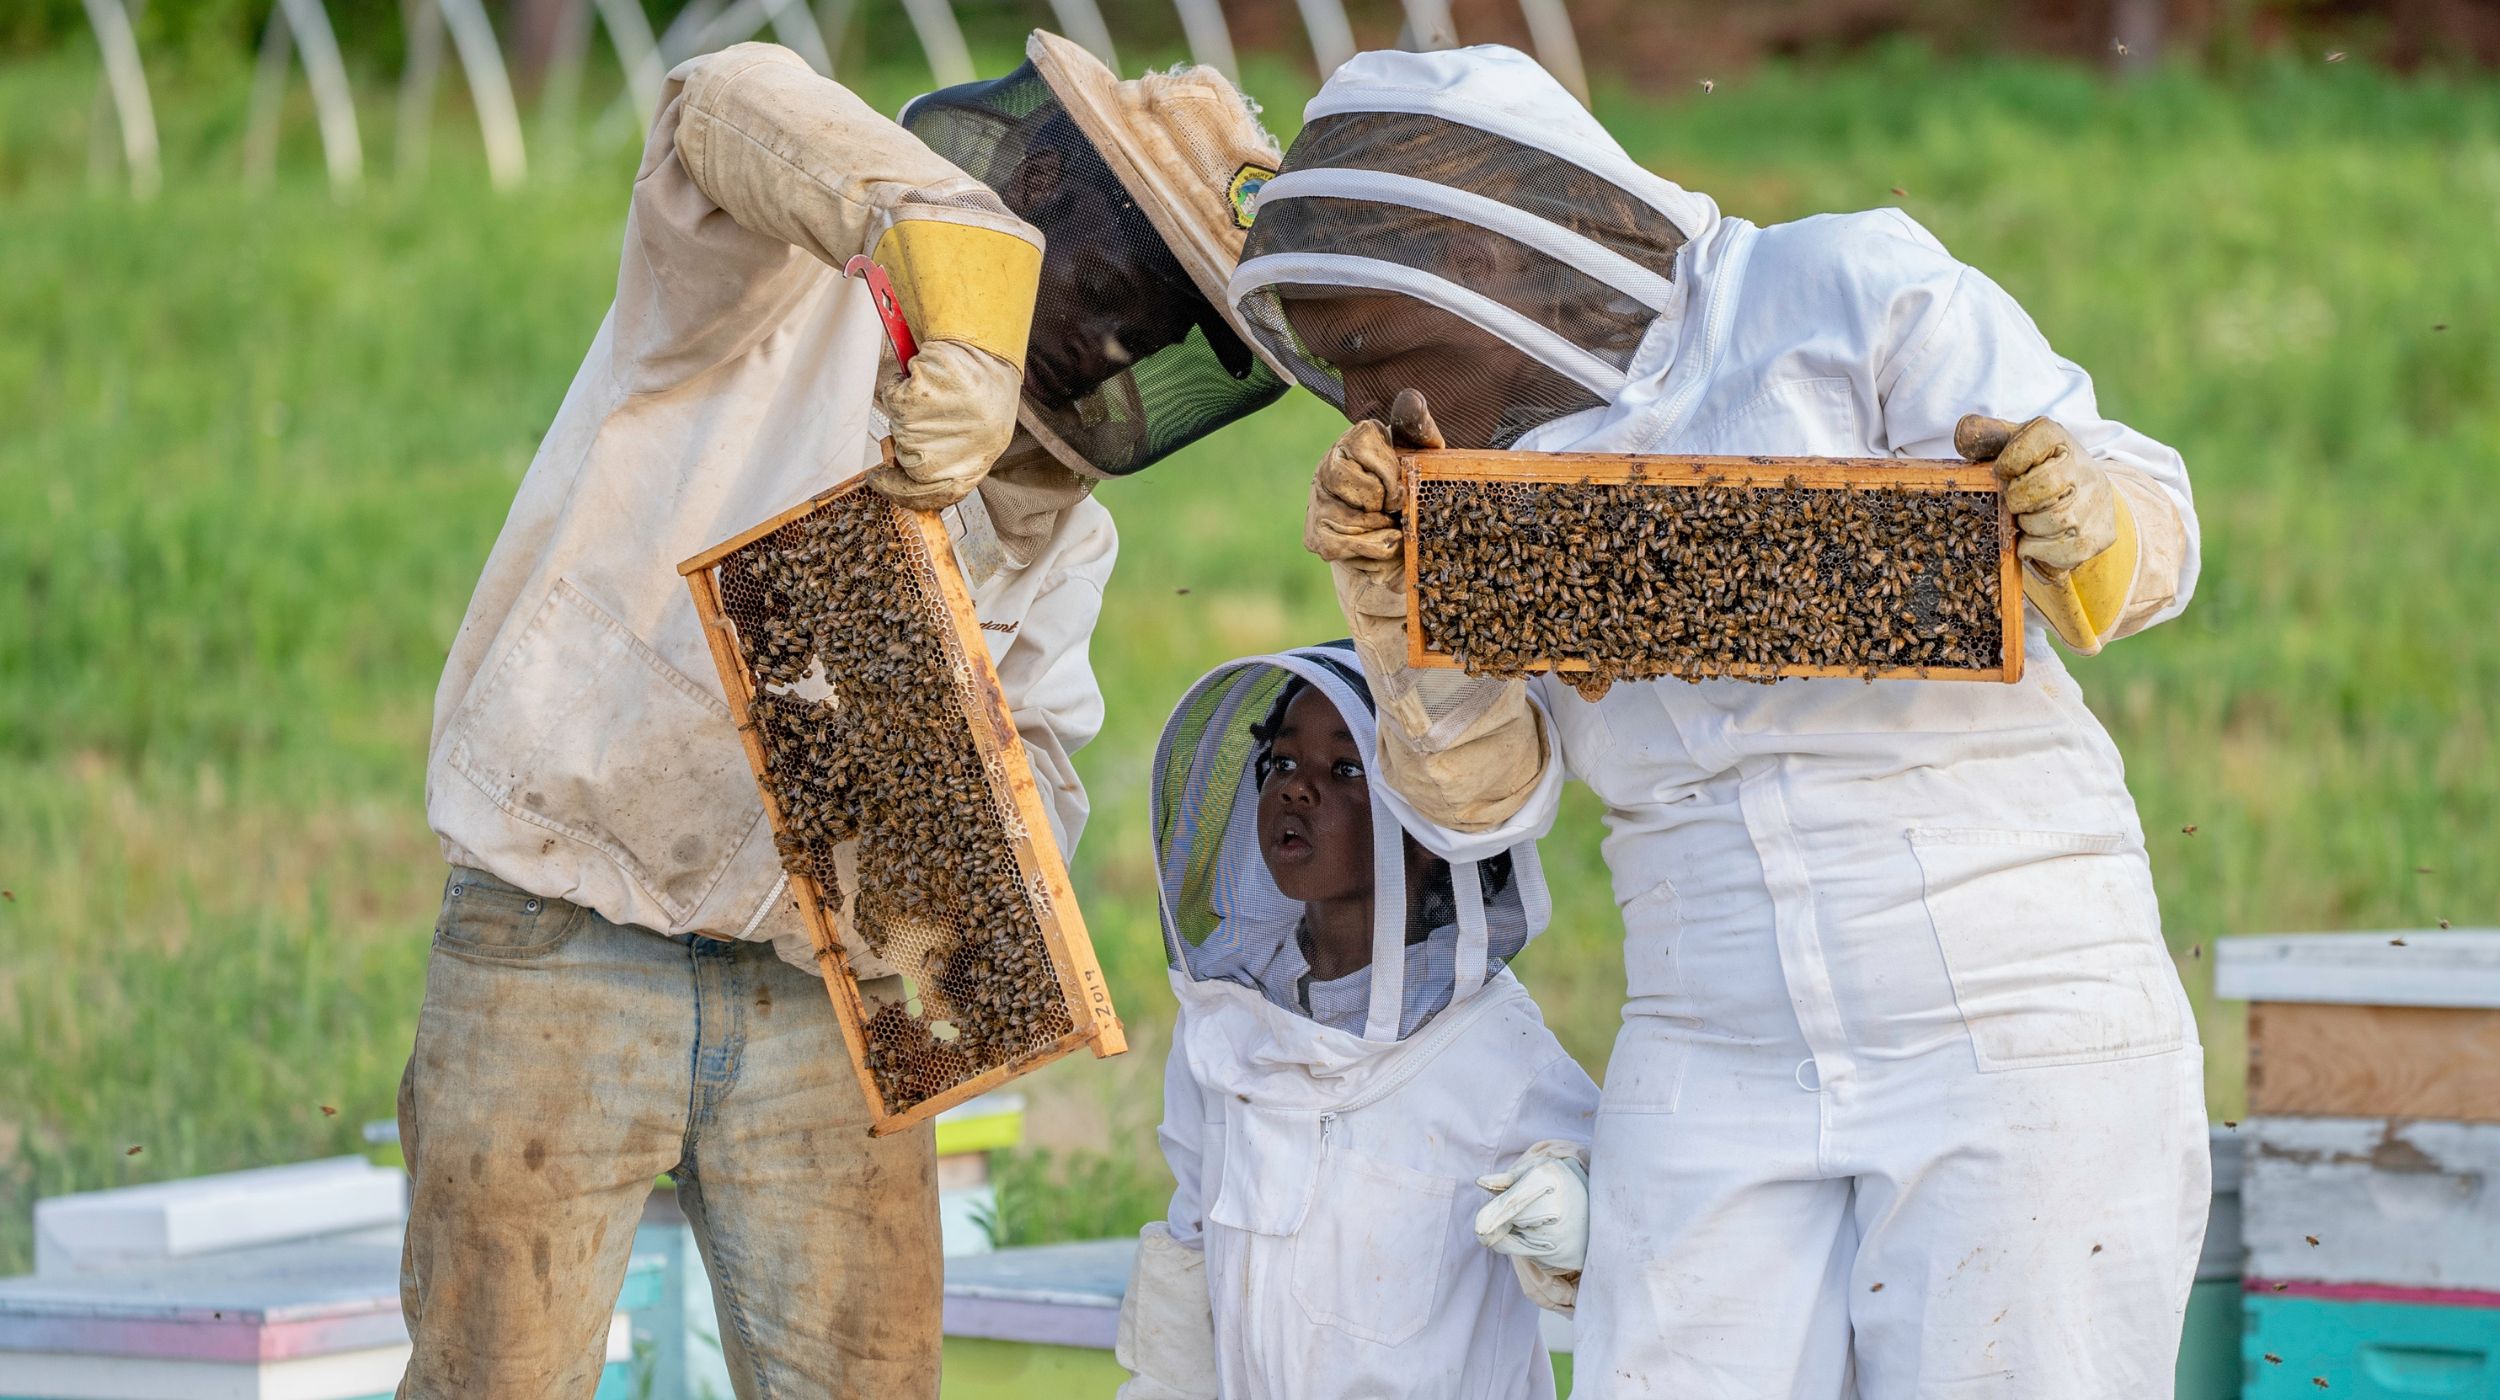 How Bees and Black Folks Have a History of Working Together